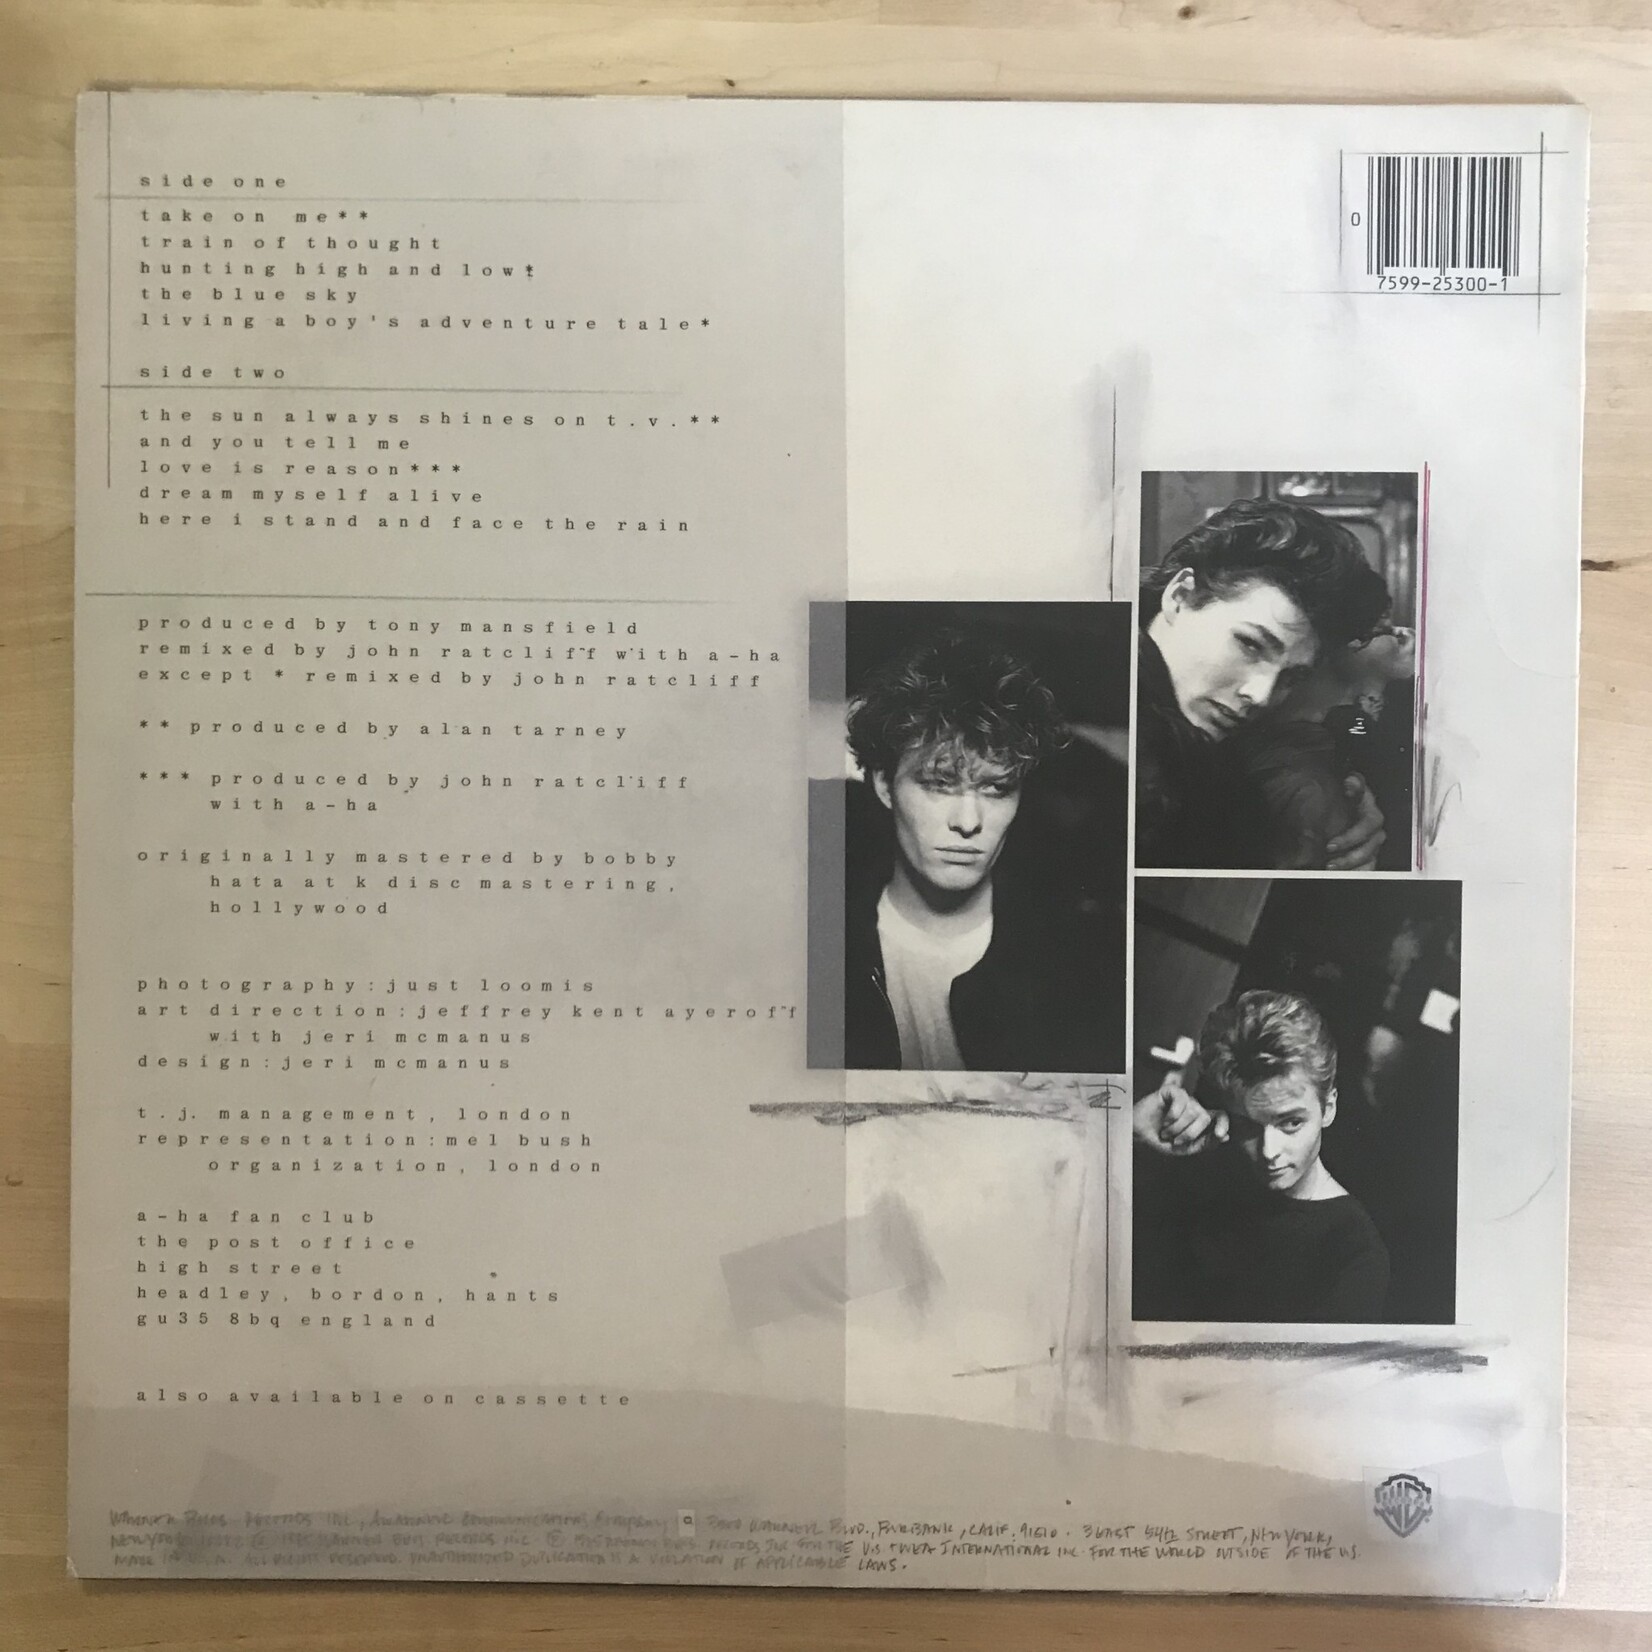 A-Ha - Hunting High And Low - 9 25300 1 - Vinyl LP (USED)